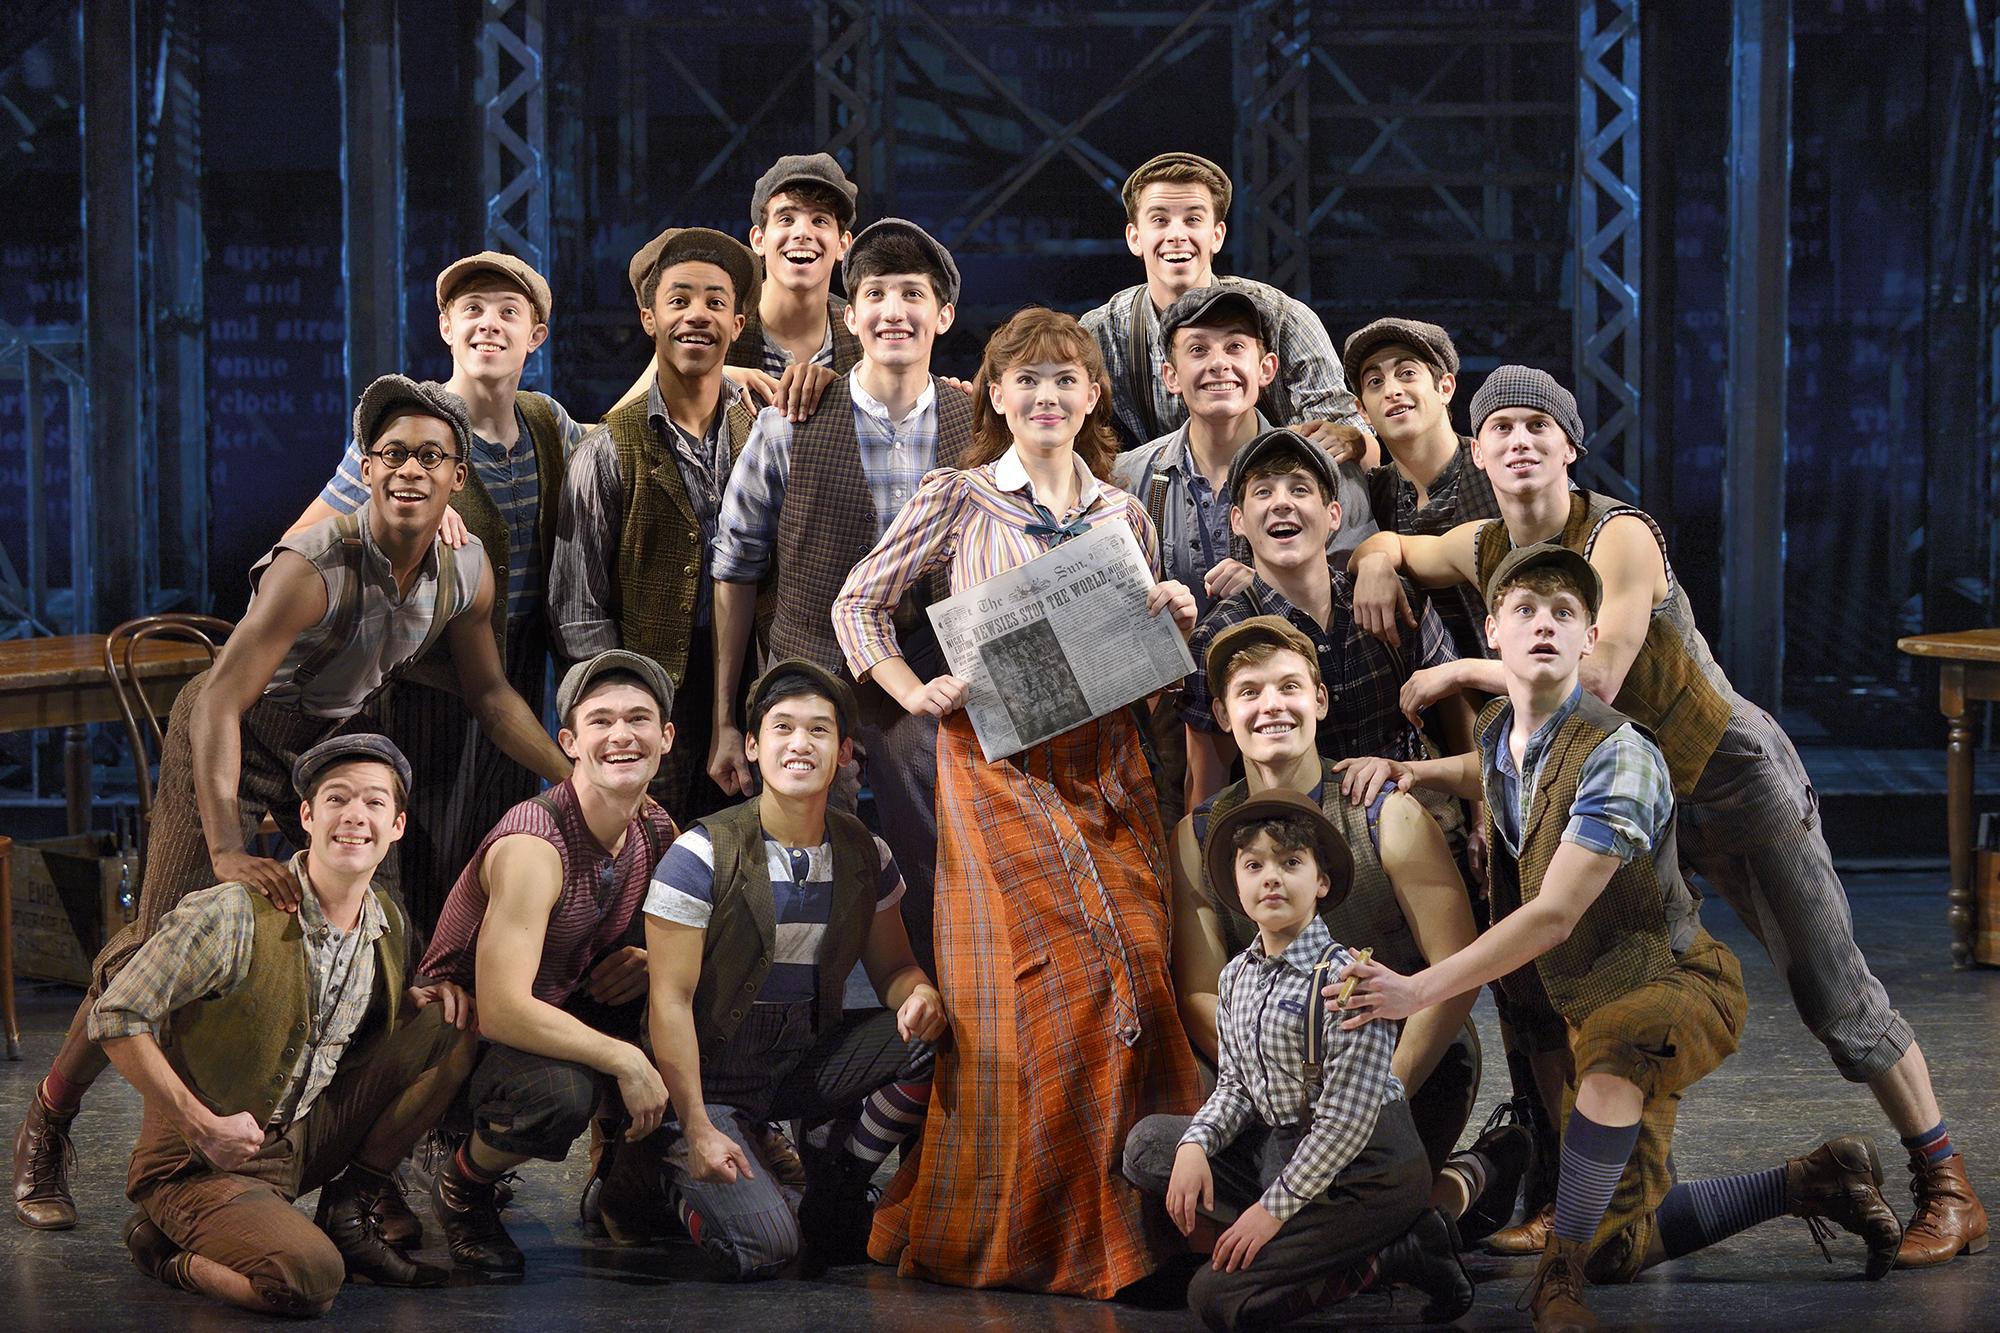 Christian Youth Theater’s ‘Newsies’ opens Friday at the Bing The